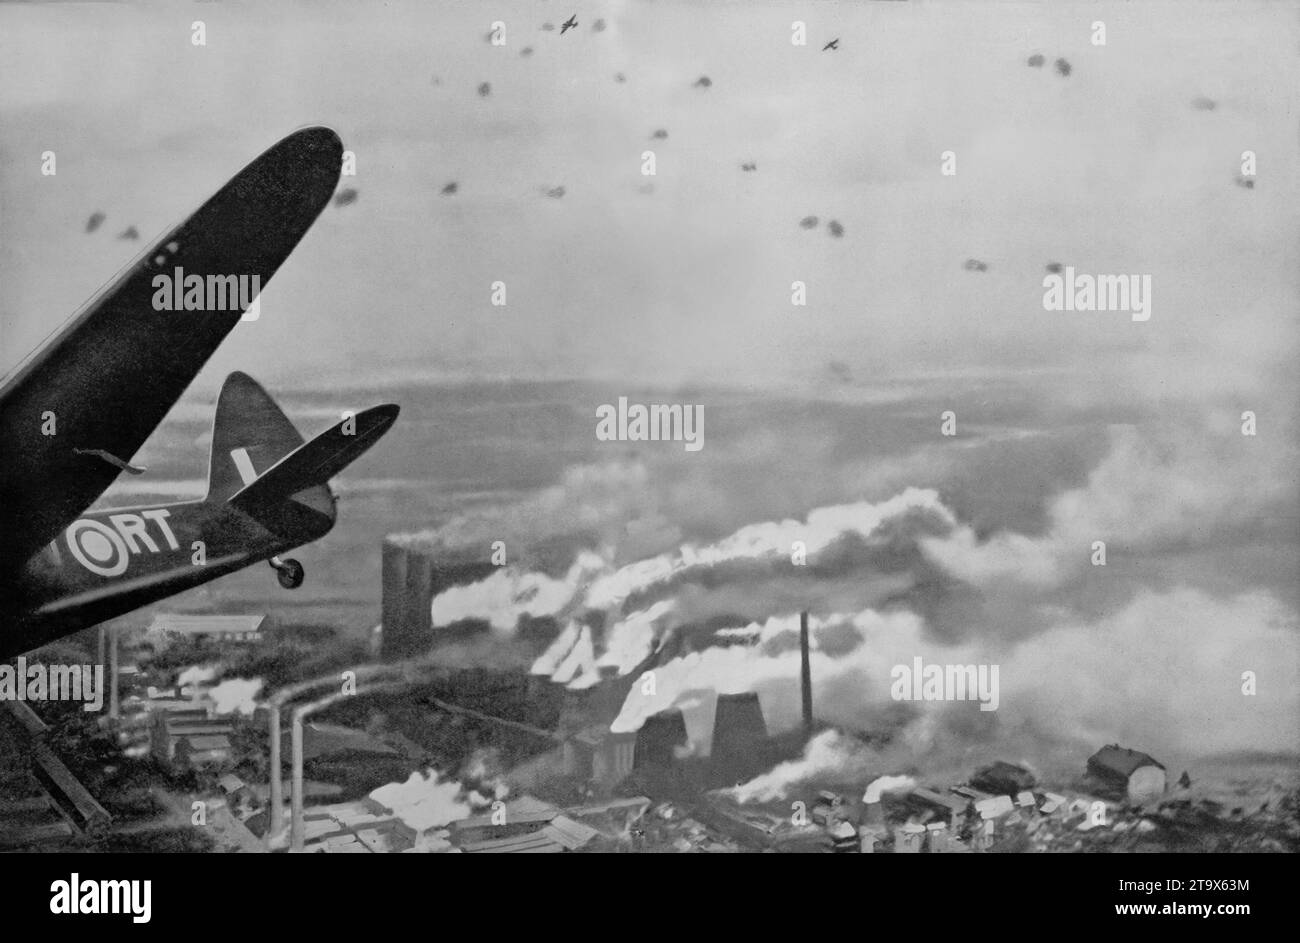 On the 12th August 1941 twelve squadrons of Blenheim bombers attacked industrial districts of Cologne, in Germany during the Second World War. The photograph shows a Blenheim after dropping its bombs on the Knapsack Power Station with two more aircraft above avoiding defensive German anti-aircraft fire. Stock Photo